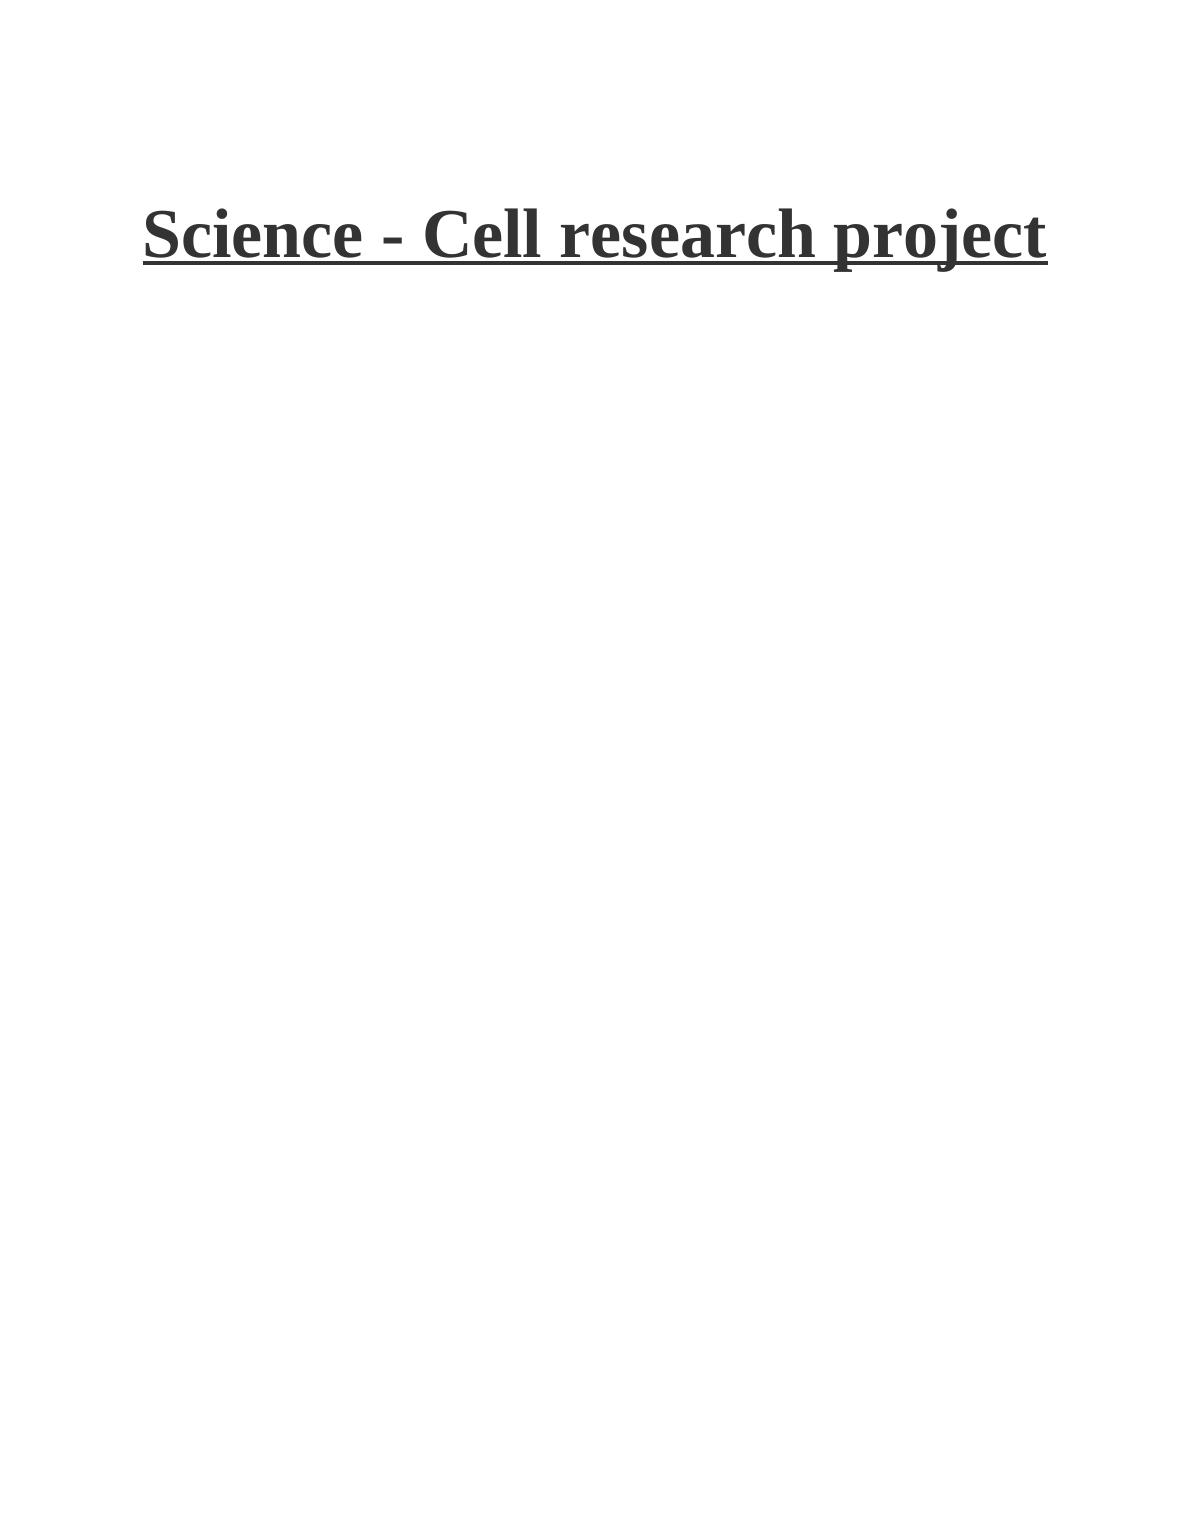 Science Assignment - Cell Research Project_1